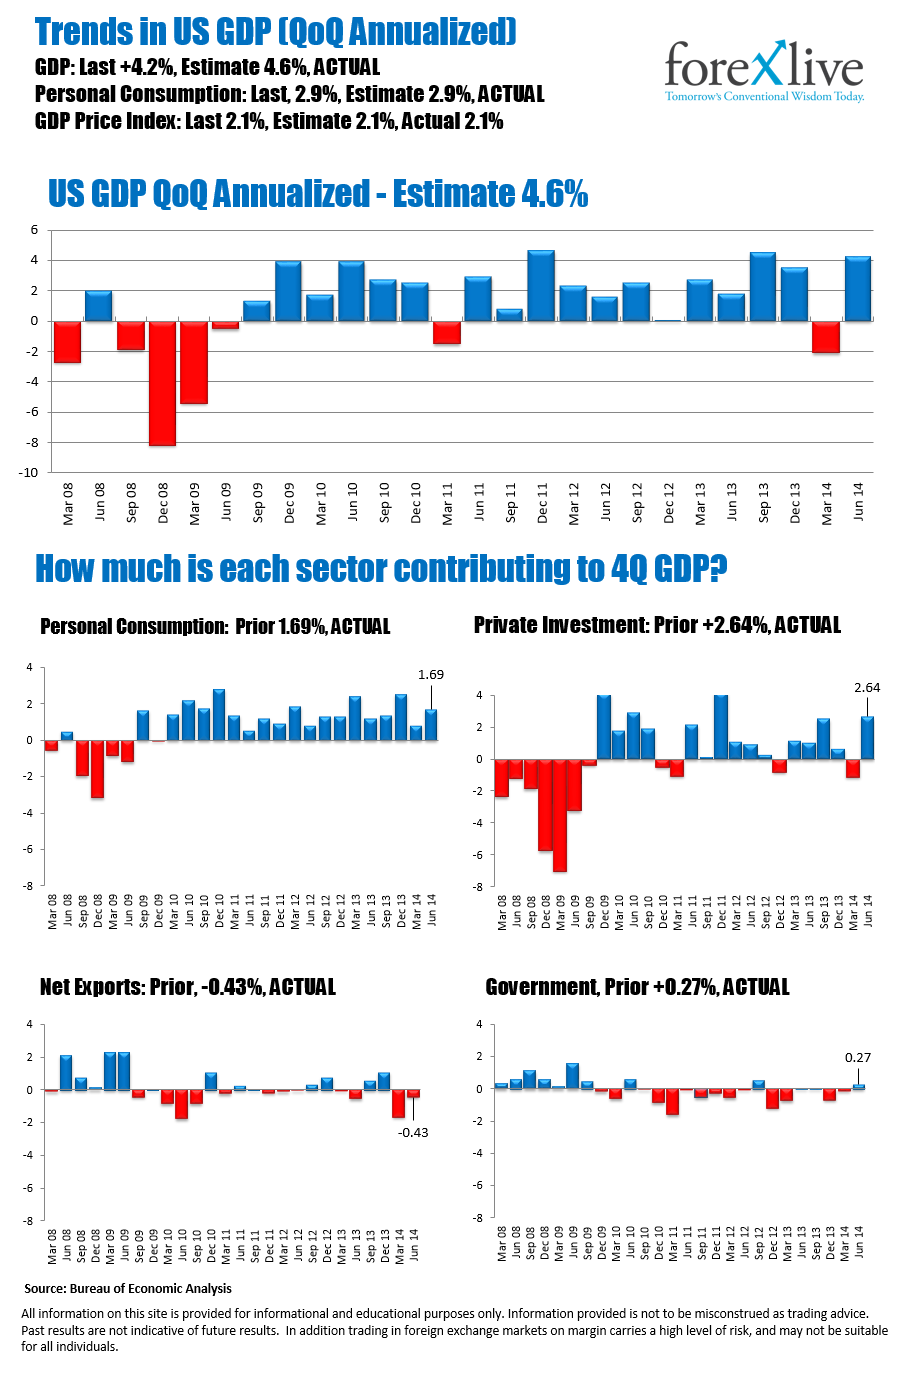 US GDP- The current story